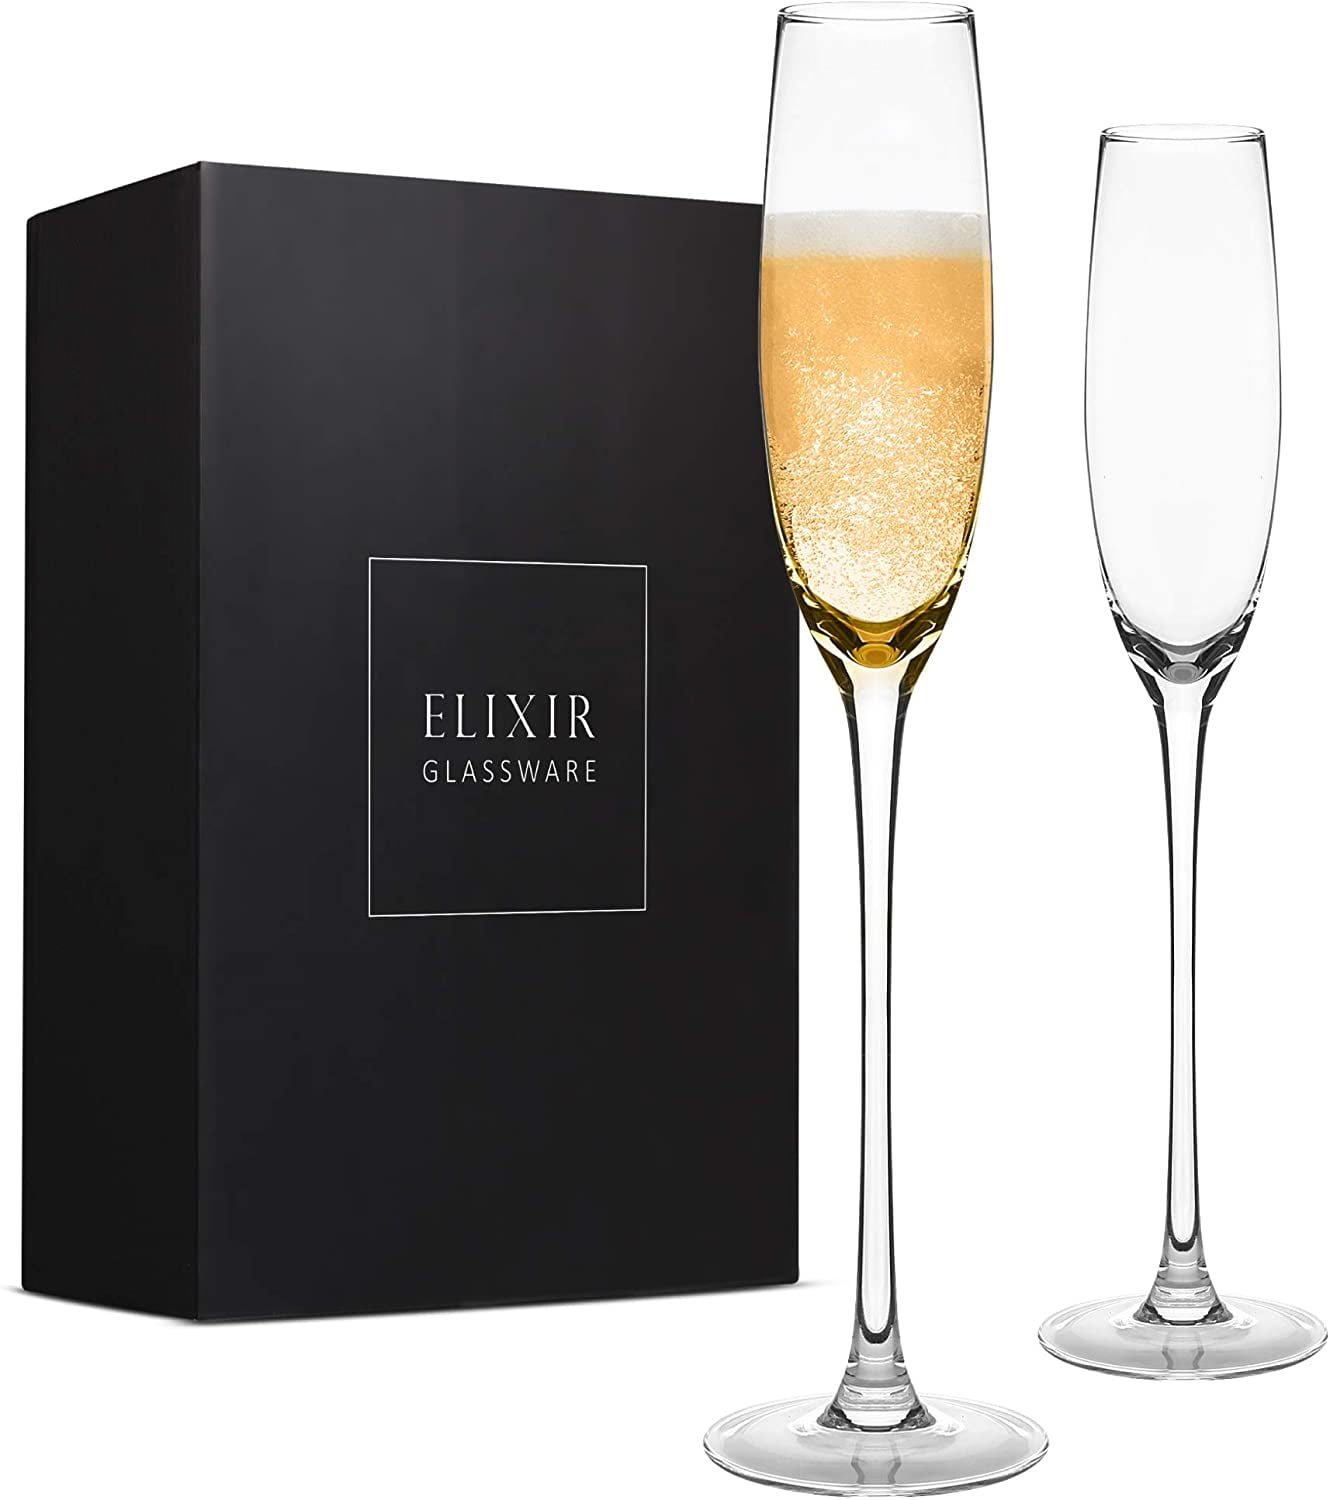 Unique Champagne Glasses for Sparkling Wine and Cocktail Champagne Flutes Set of 4 Lead-Free Wedding Champagne Flute Glass 4-Pack in Gift Box Hand-Blown Crystal Mimosa Glasses